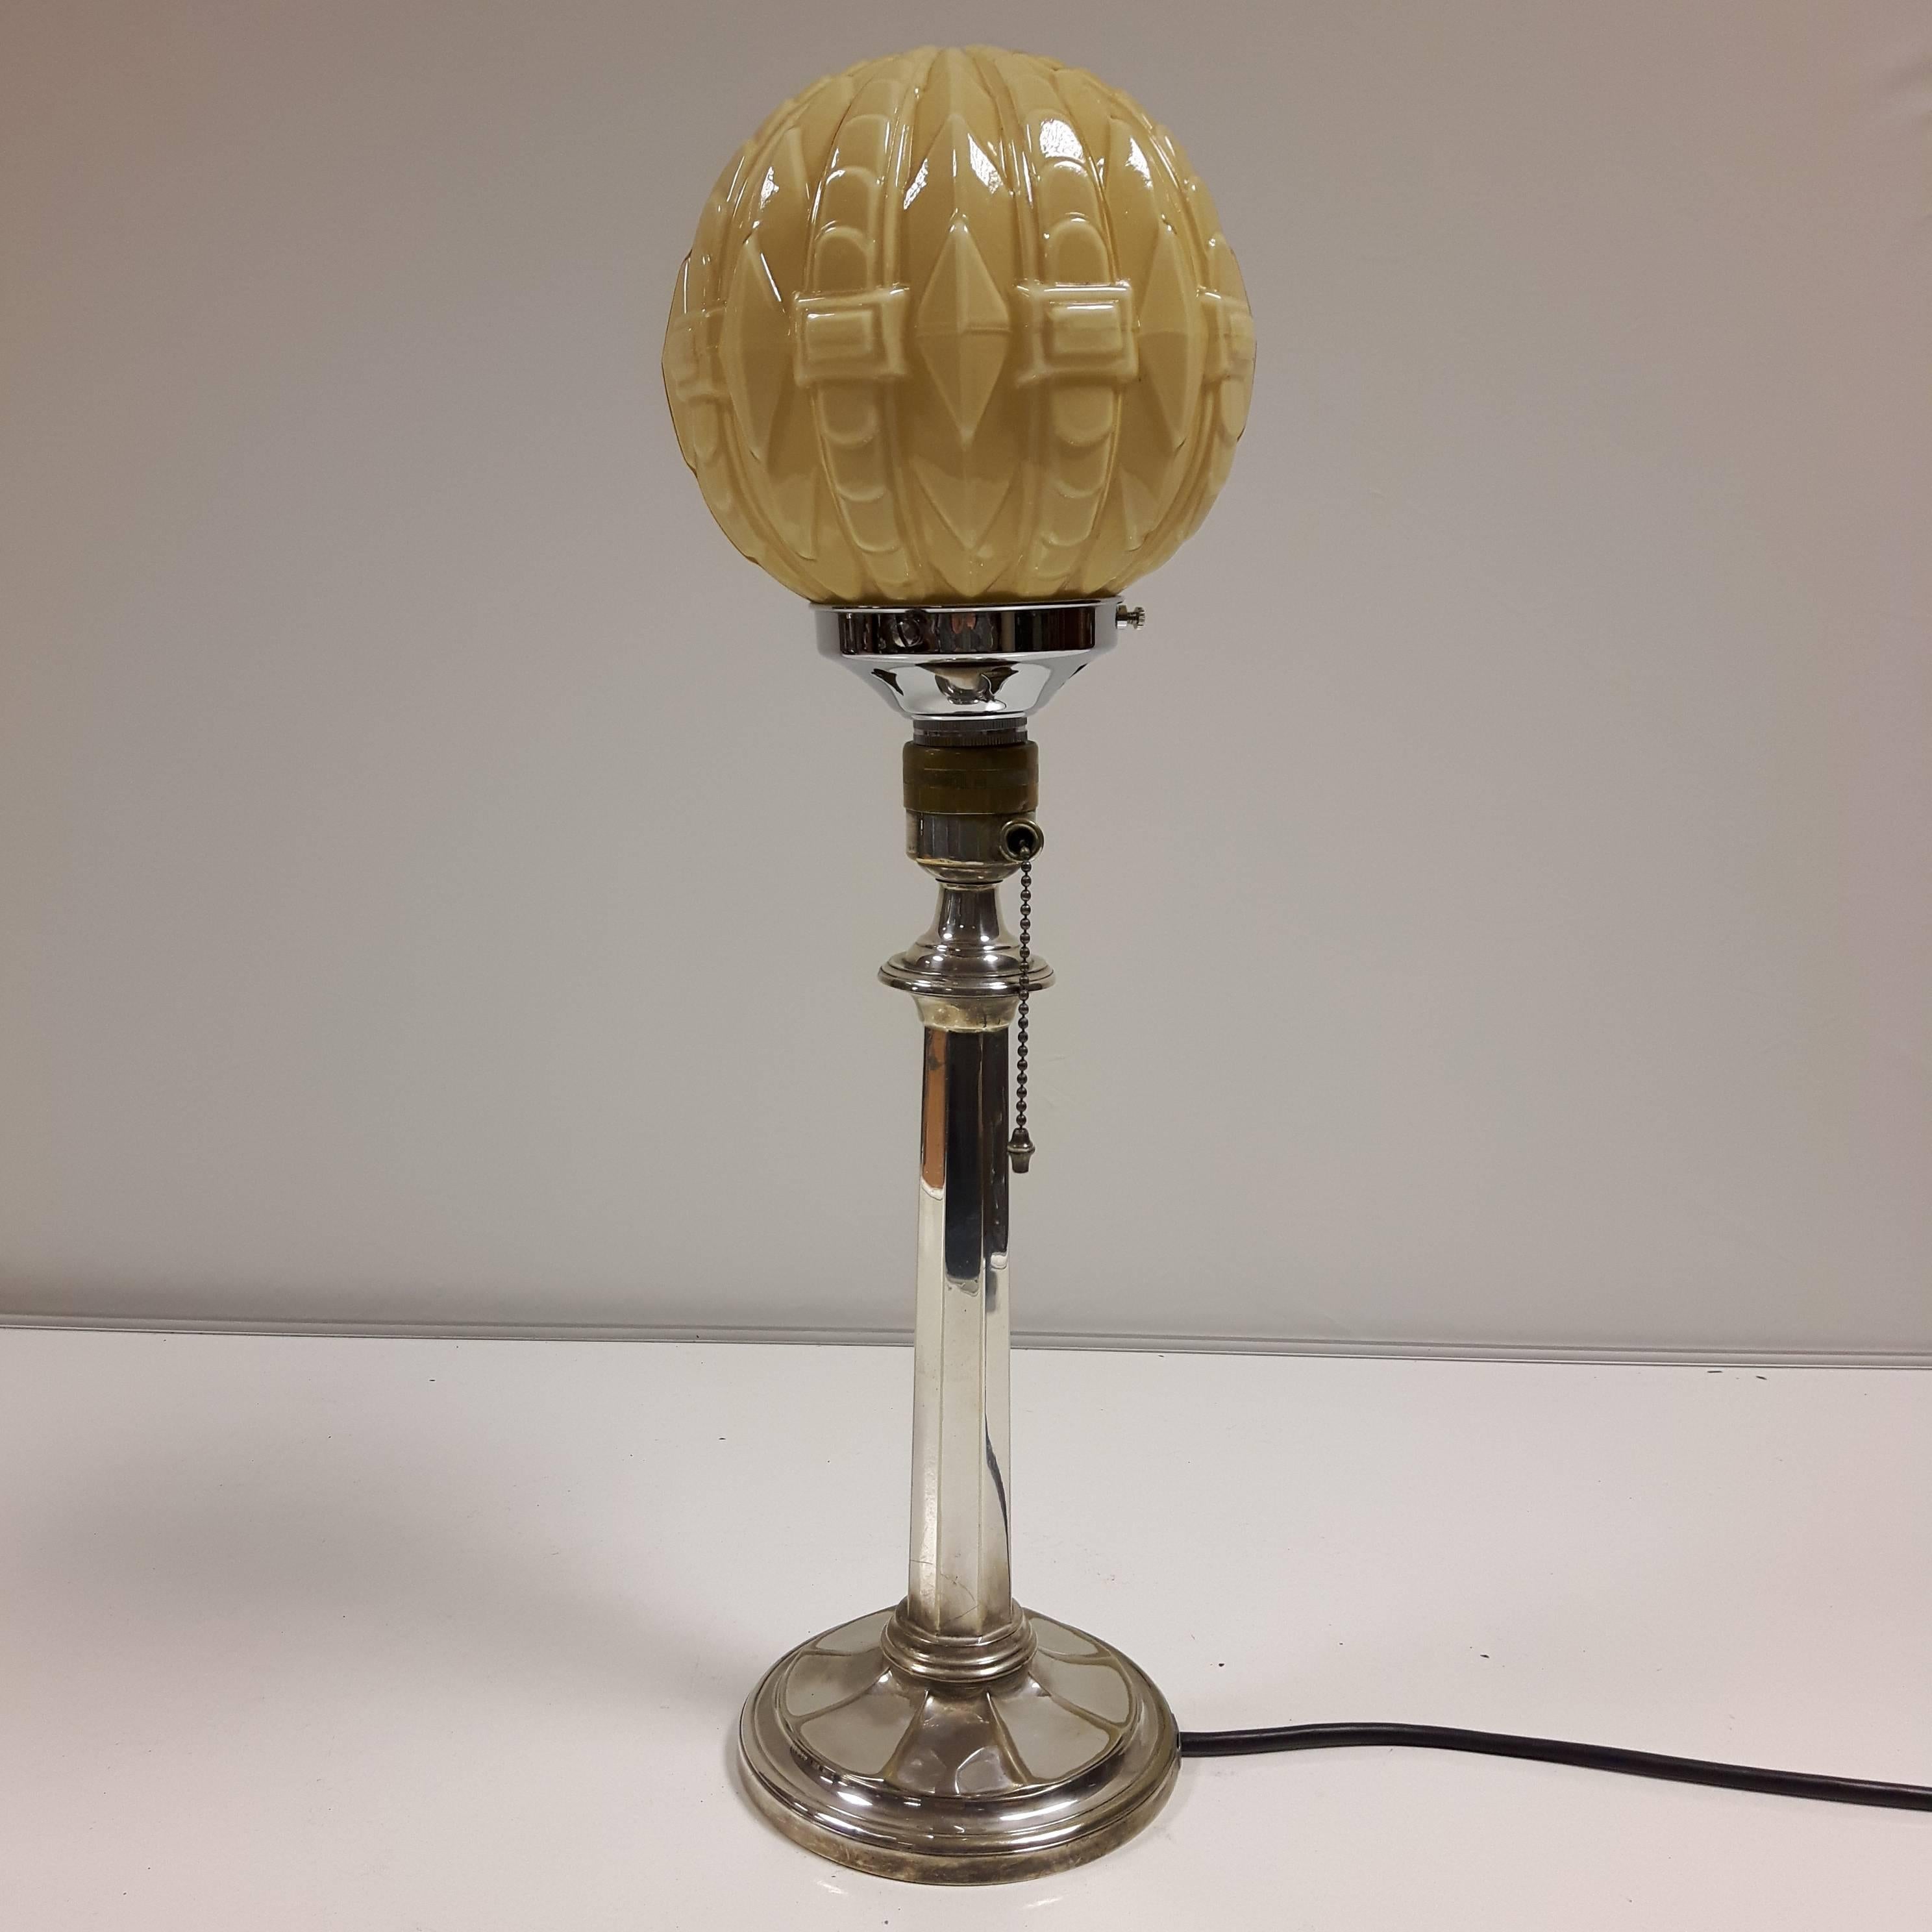 Rare, early 20th century silver plated table lamp produced by the famous jeweller, Mappin and Webb for the US market (still has the original pull chain), but rewired with a UK domestic plug. Stamped on the base with 'Mappin and Webb - Prince's